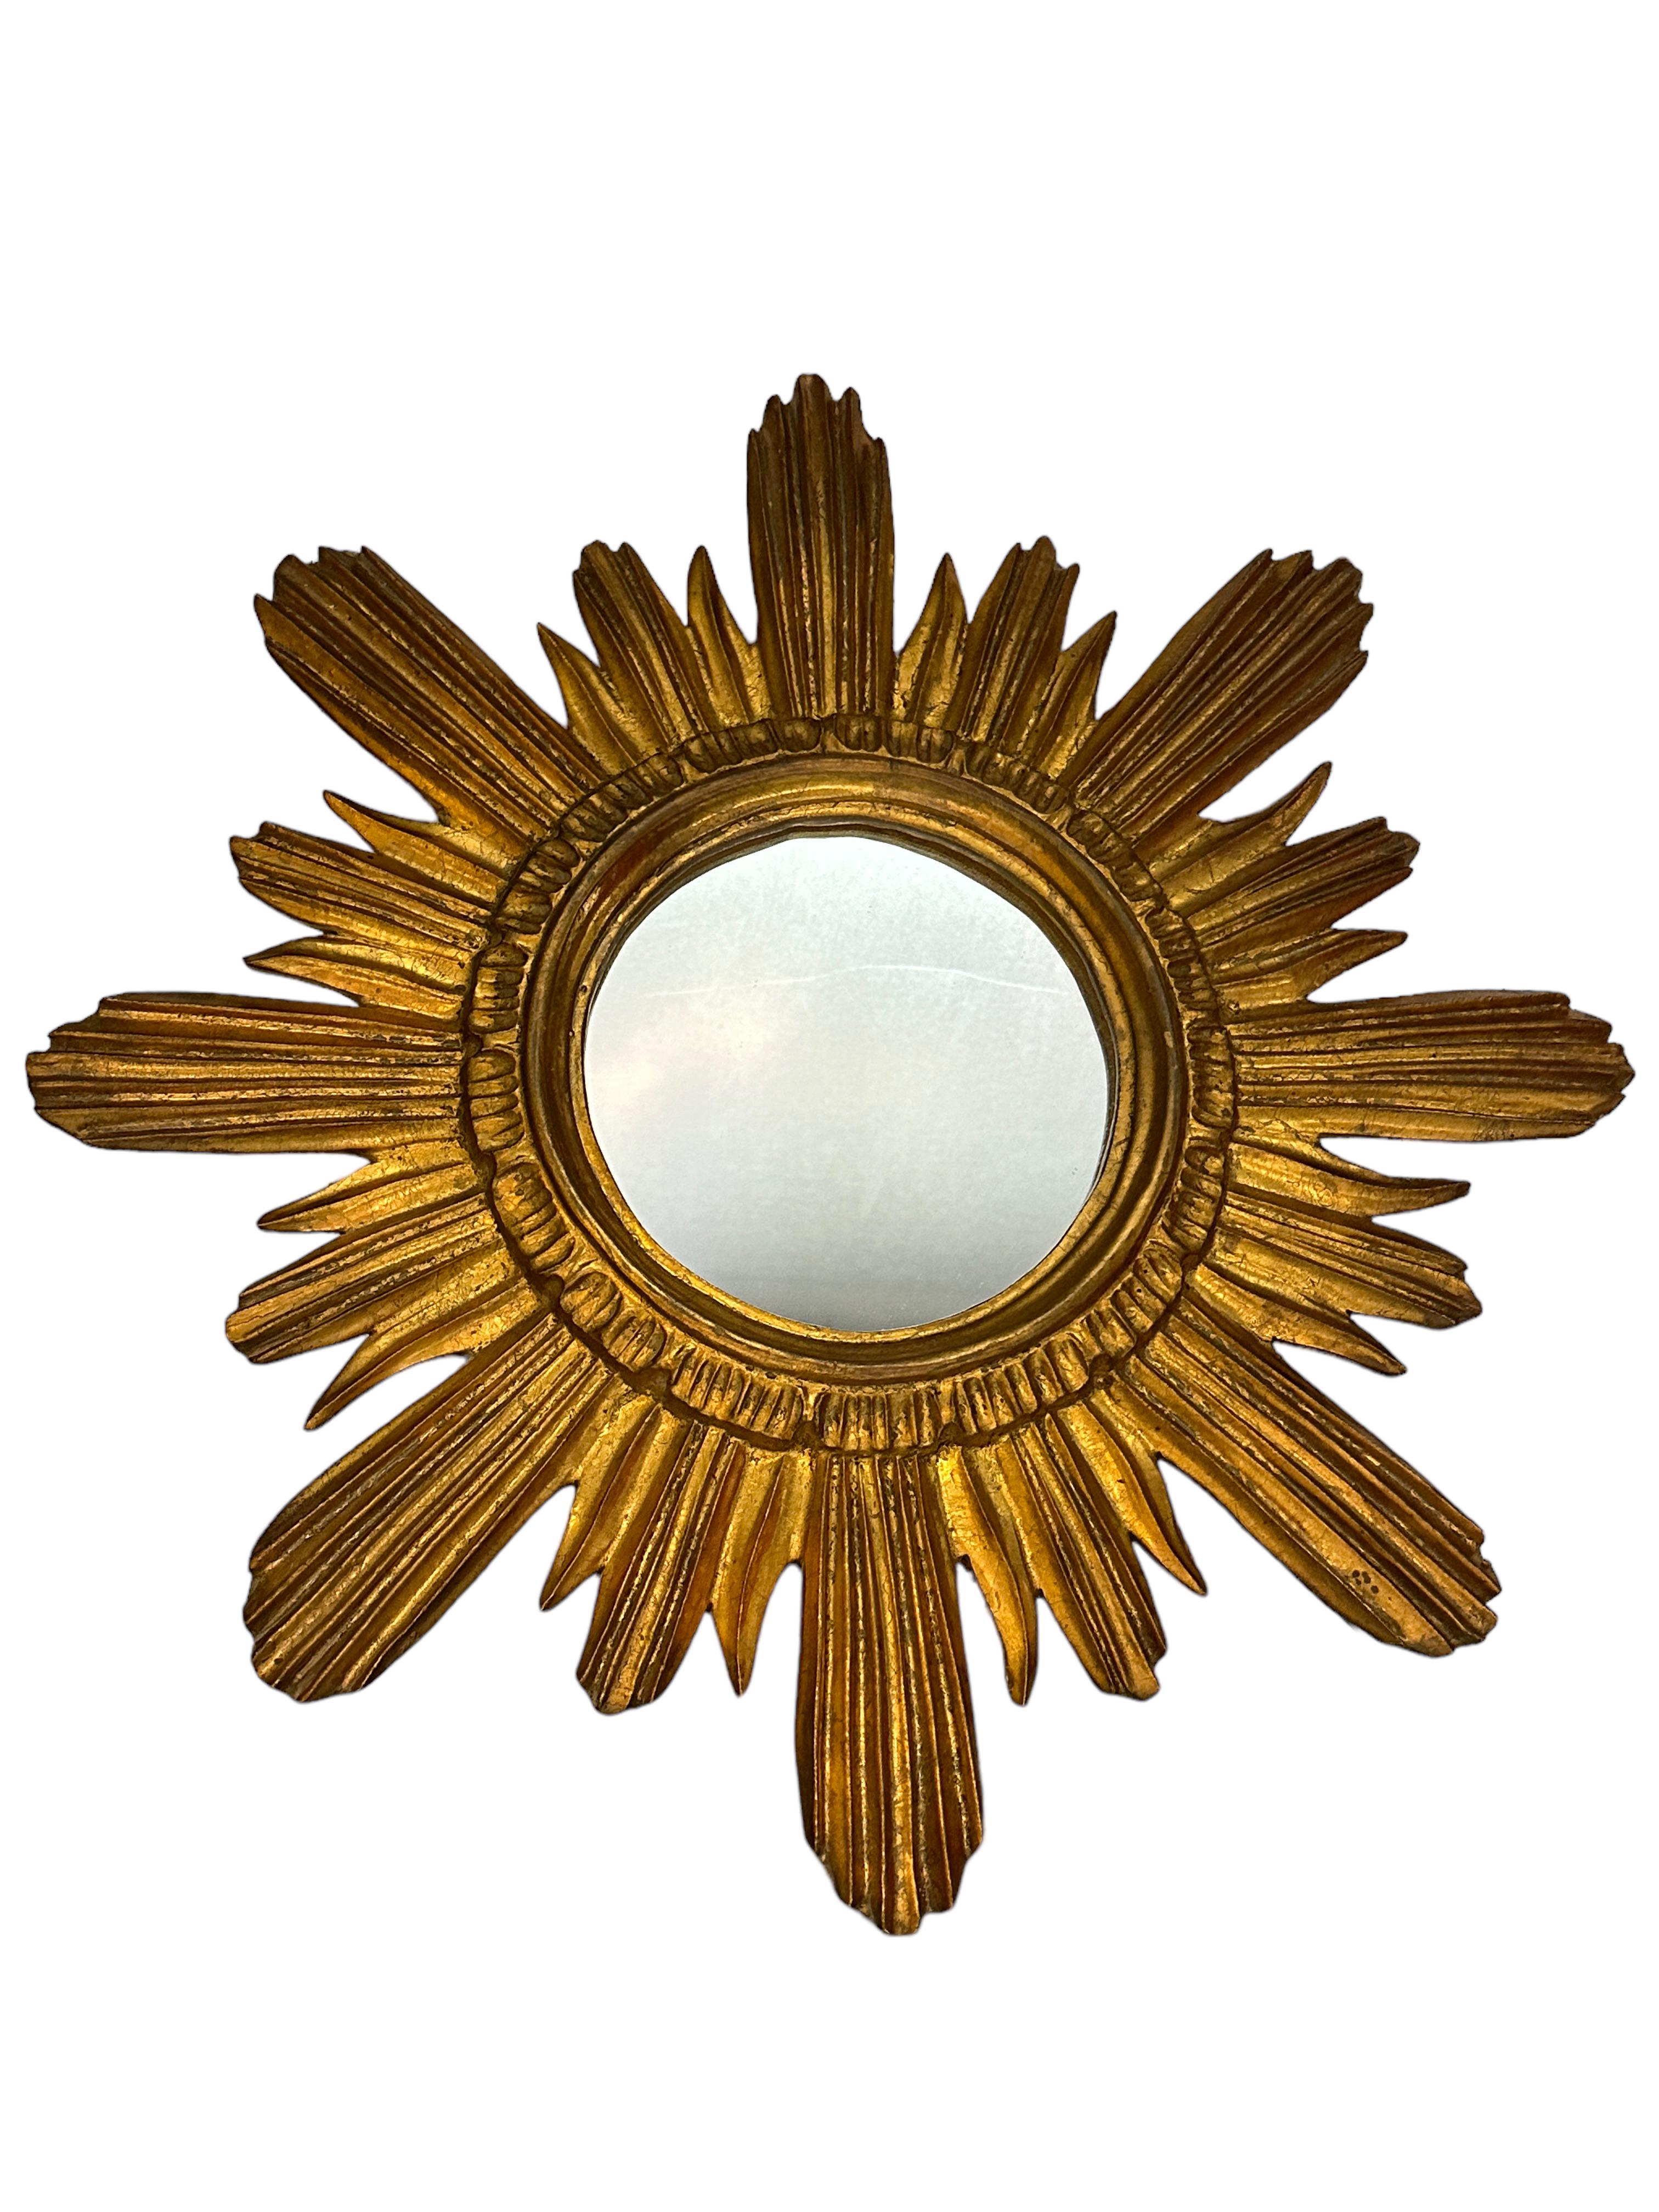 A gorgeous starburst mirror. Made of gilded wood and stucco. No chips, no cracks, no repairs. It measures approximate: 17.38